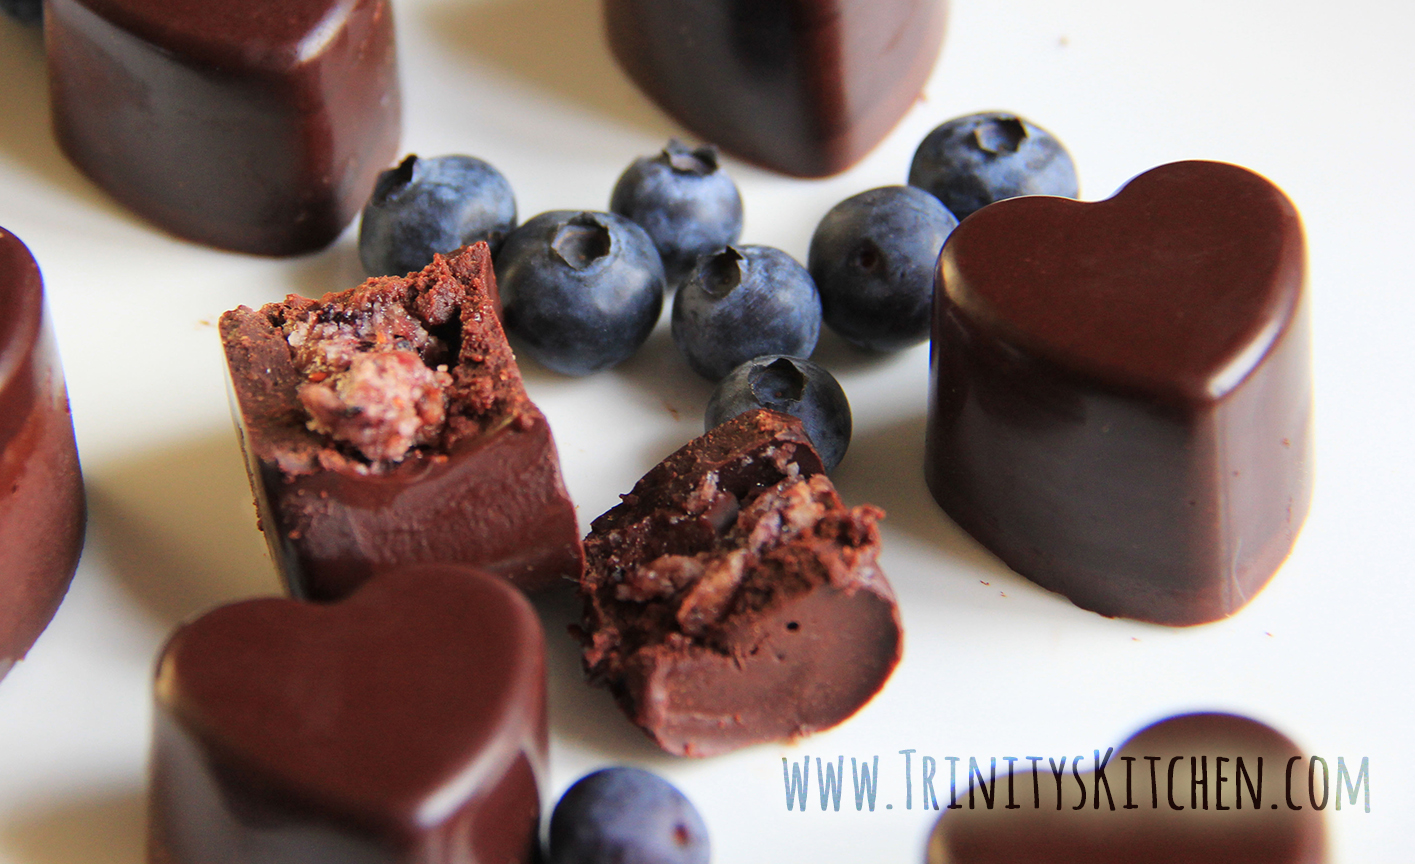 Chocolate Blueberry Lovehearts